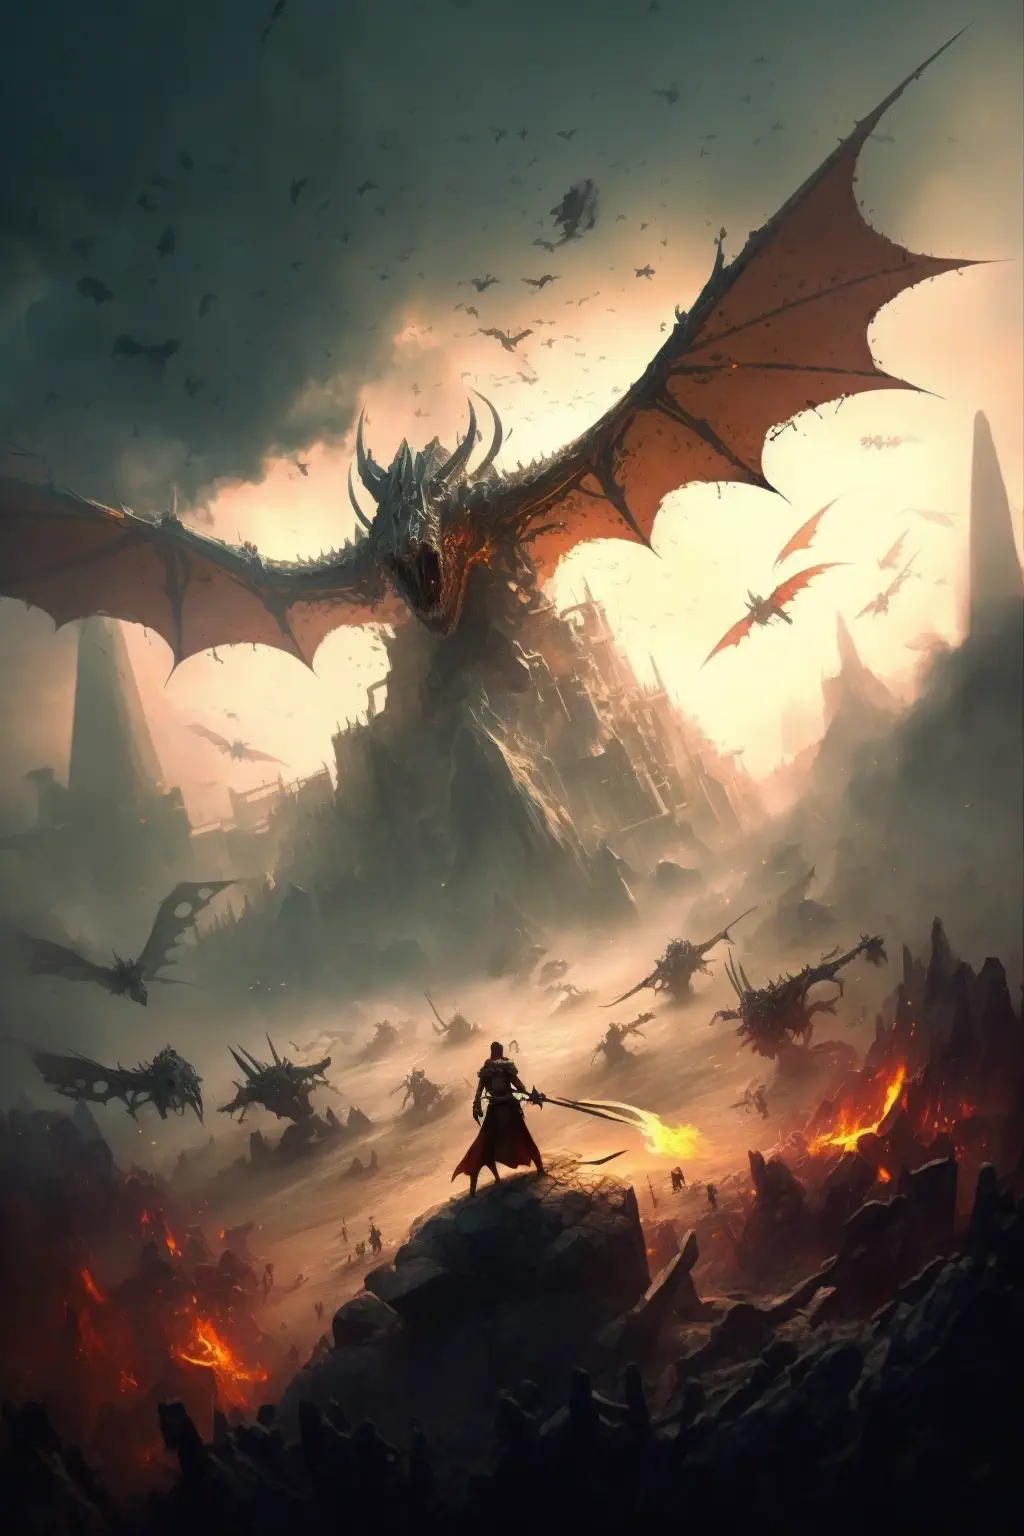 Draken_large_scale_fantasy_war_with_dragons_view_from_the_sky_v_3897c400-3e6f-4fd0-b2e8-7210de9954d2